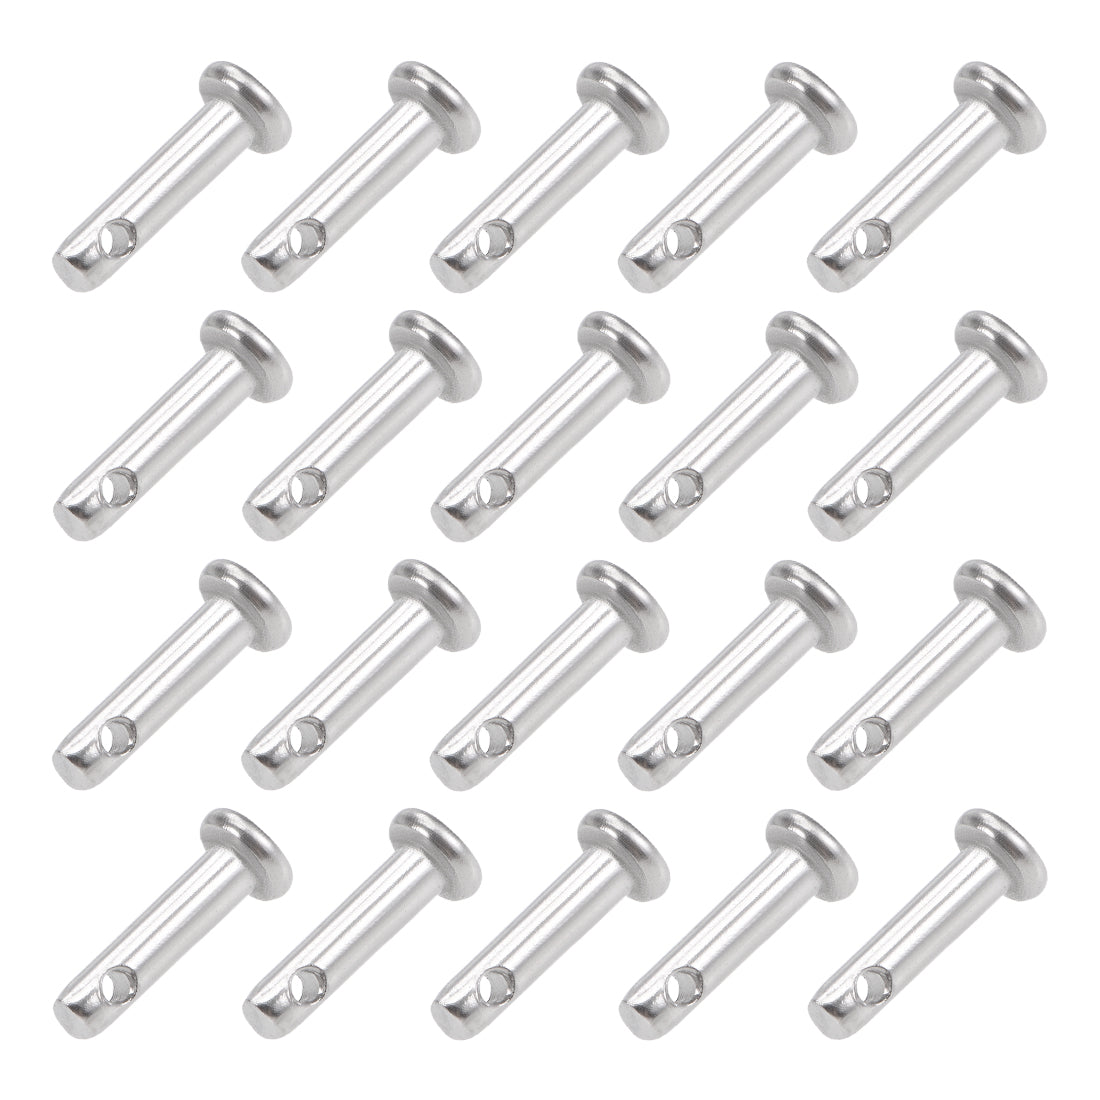 uxcell Uxcell Single Hole Clevis Pins - 3mm x 12mm Flat Head 304 Stainless Steel Link Hinge Pin 20Pcs